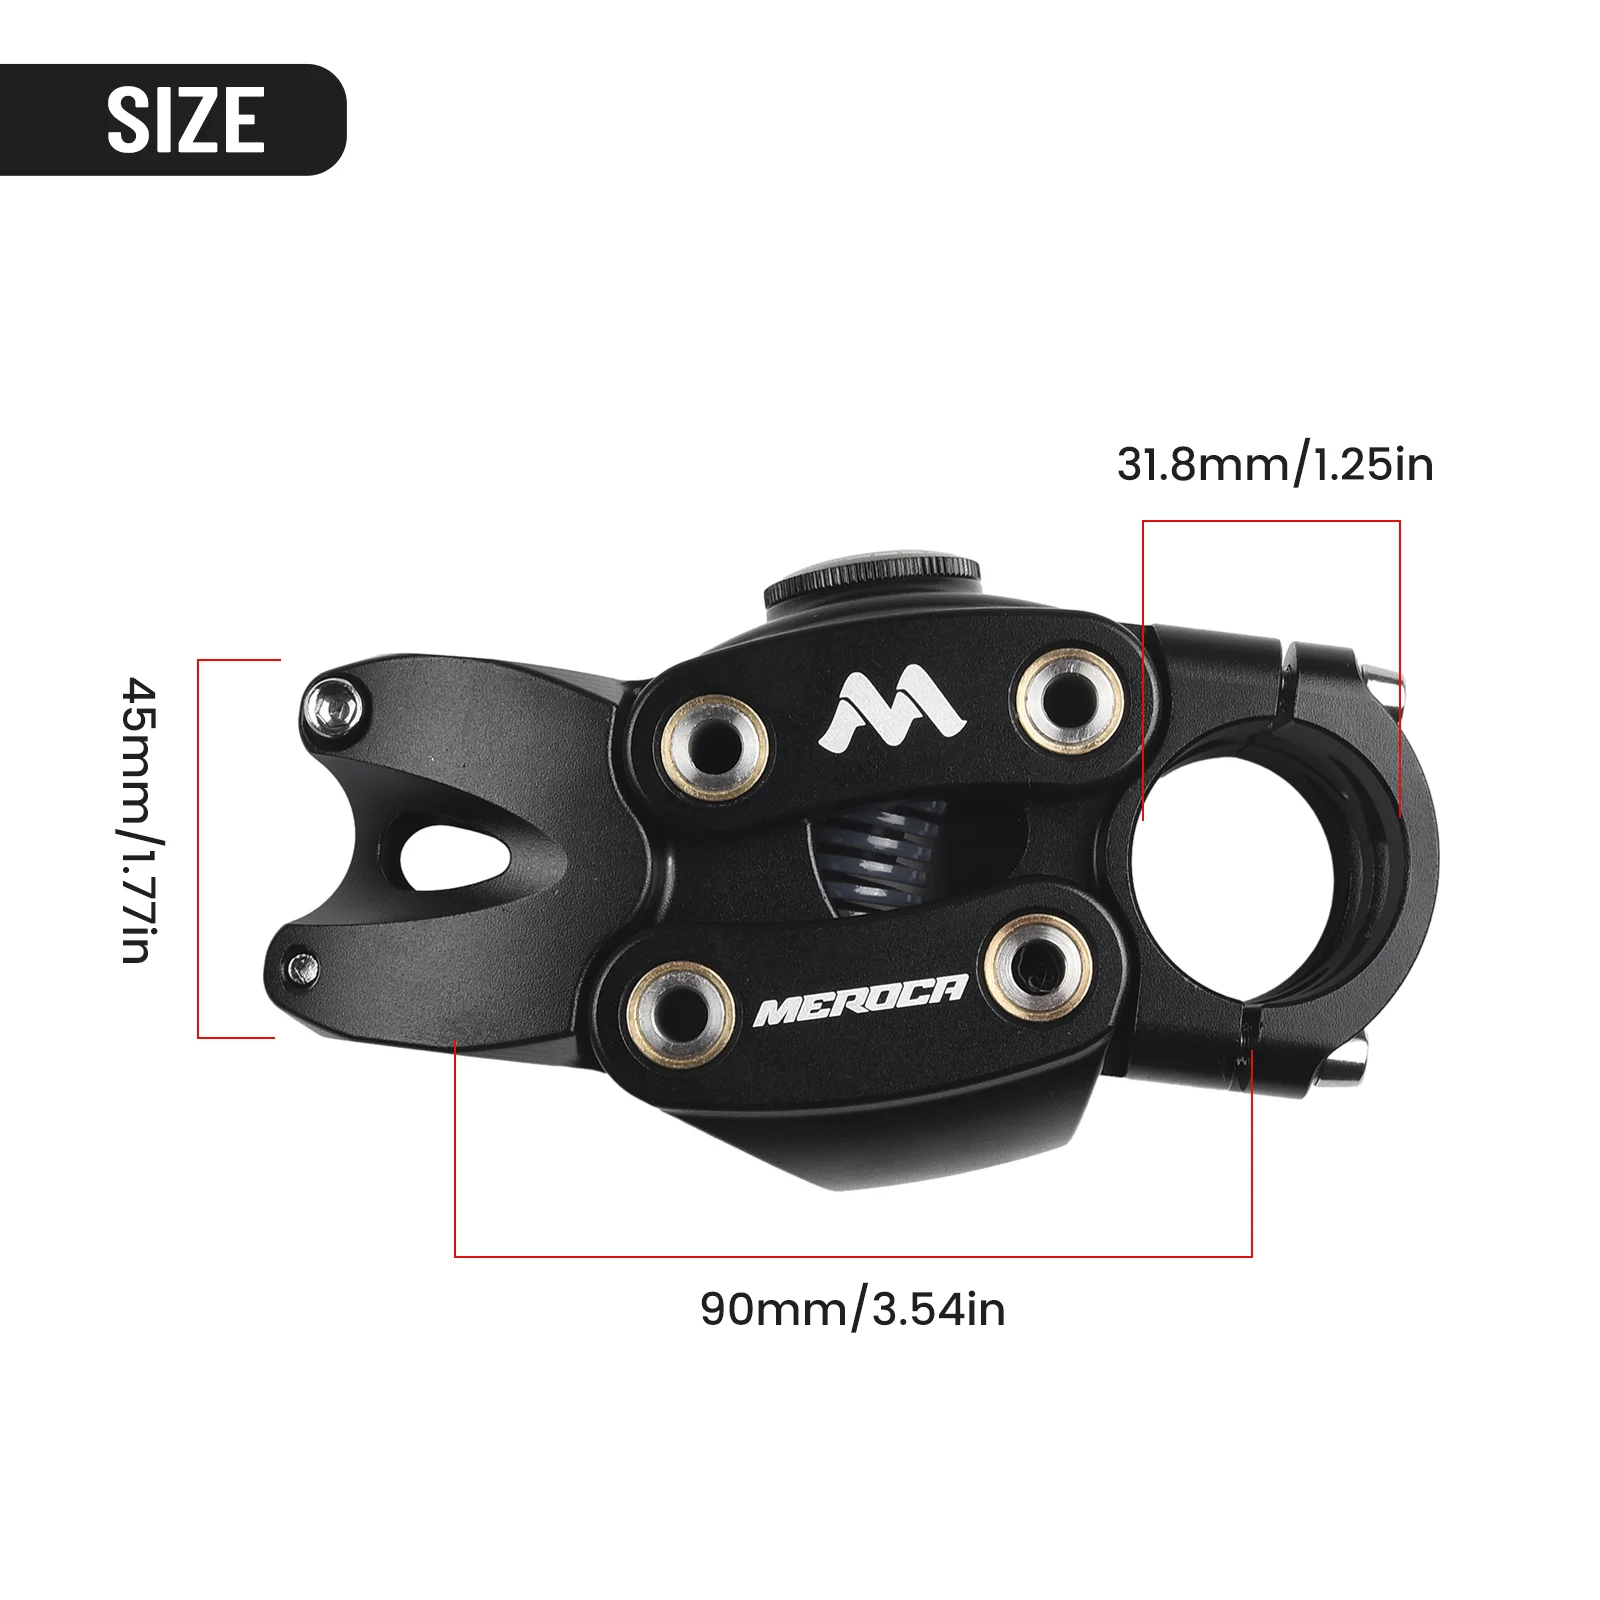 

Practical High Quality Nice Bike Stem Tools Parts Accessories Black Main Aluminium Alloy Useful 90MM About 450g/set